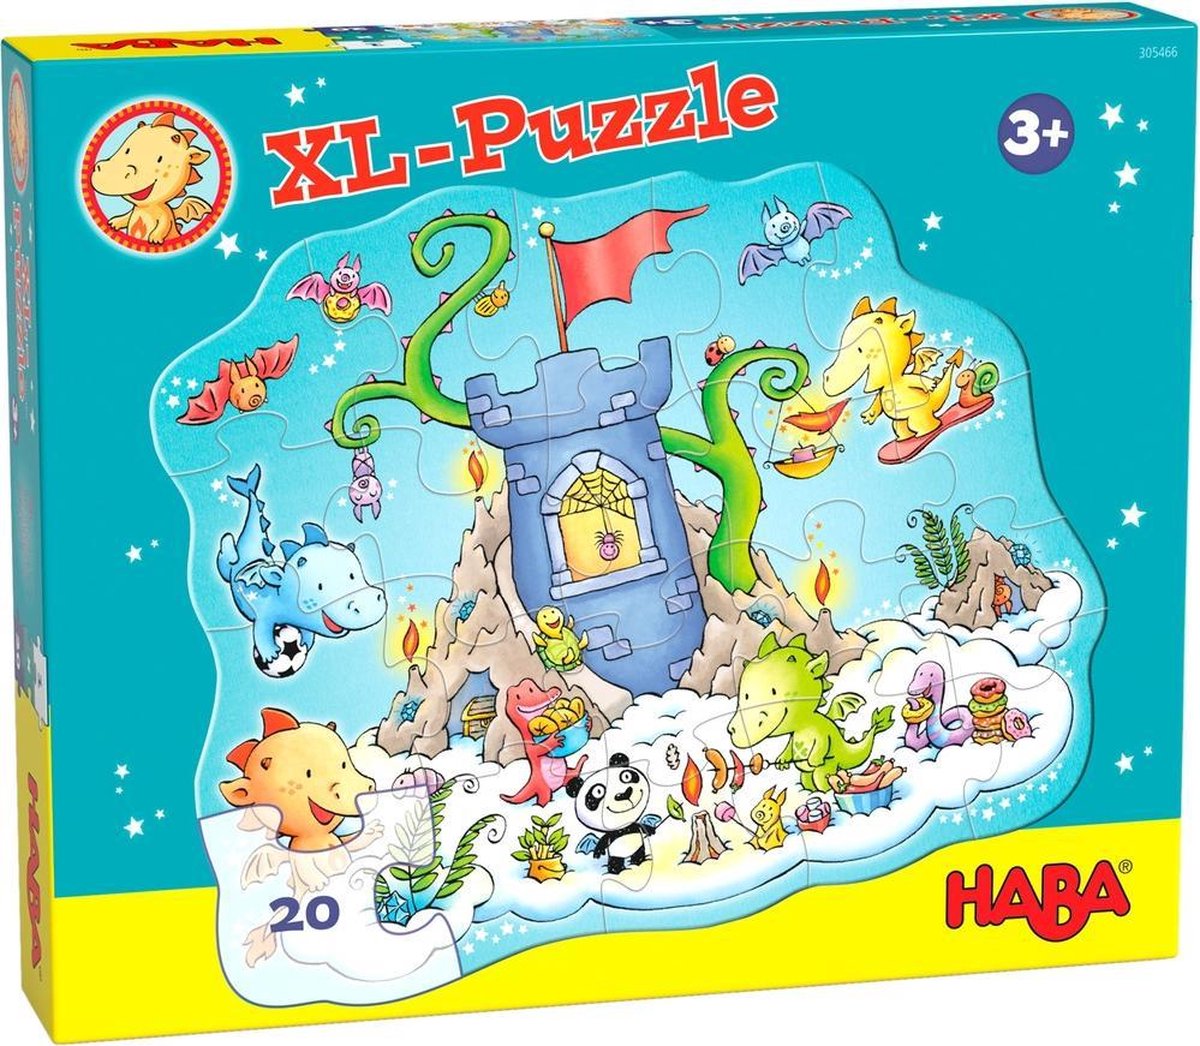 XL-Puzzle Haba Draak Fonkelvuur - Puzzle-party